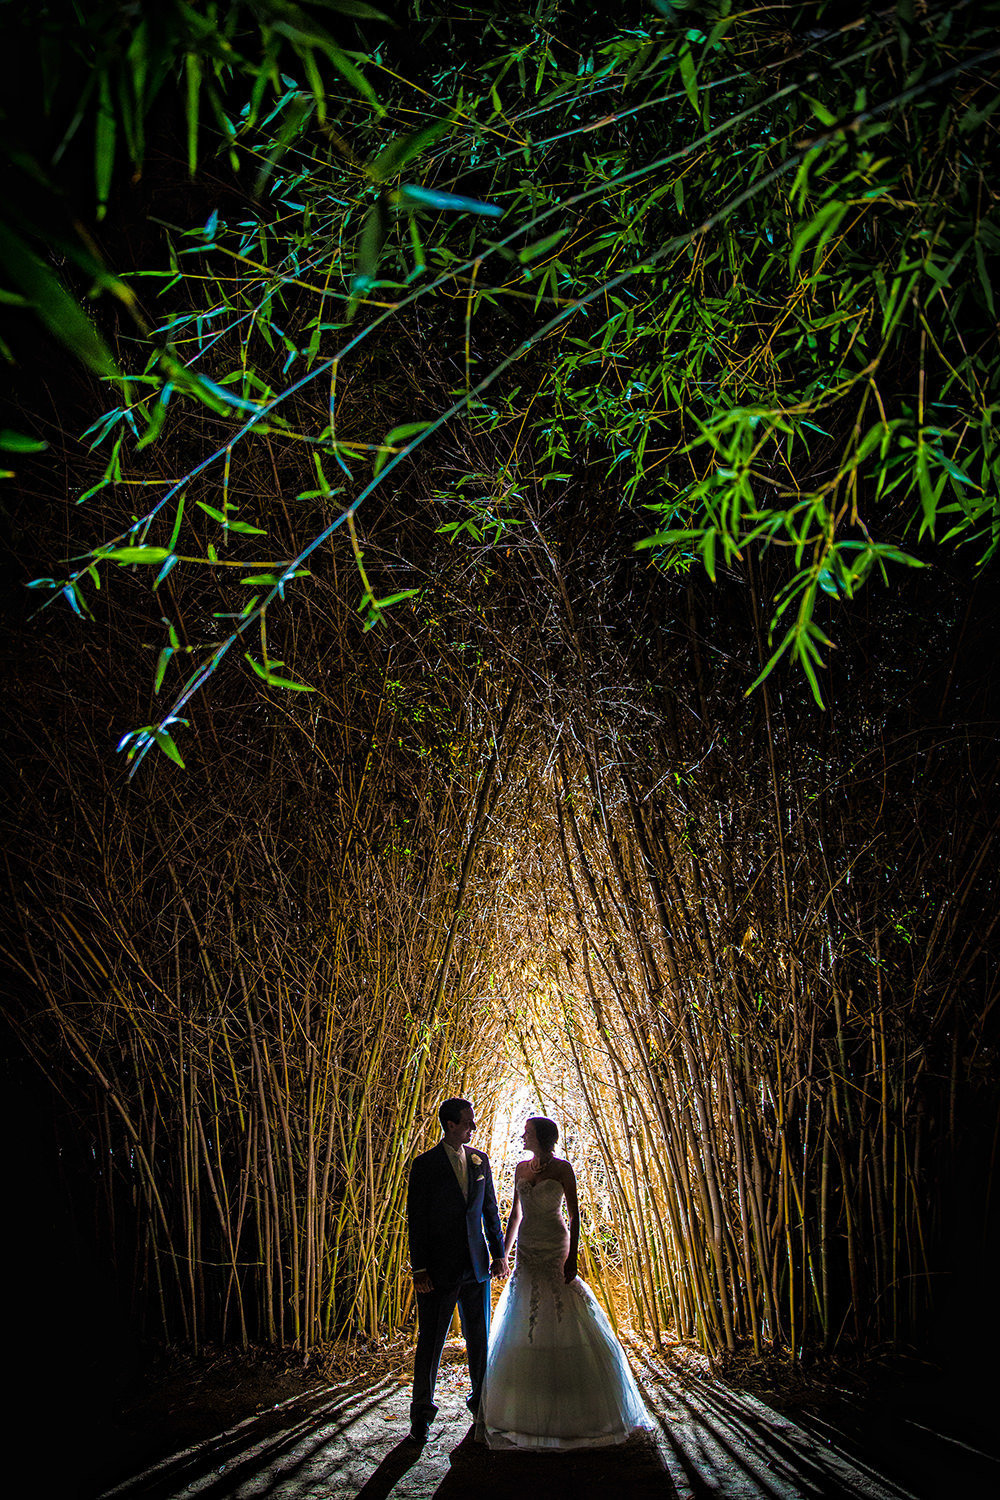 night image of couple in the bamboo field